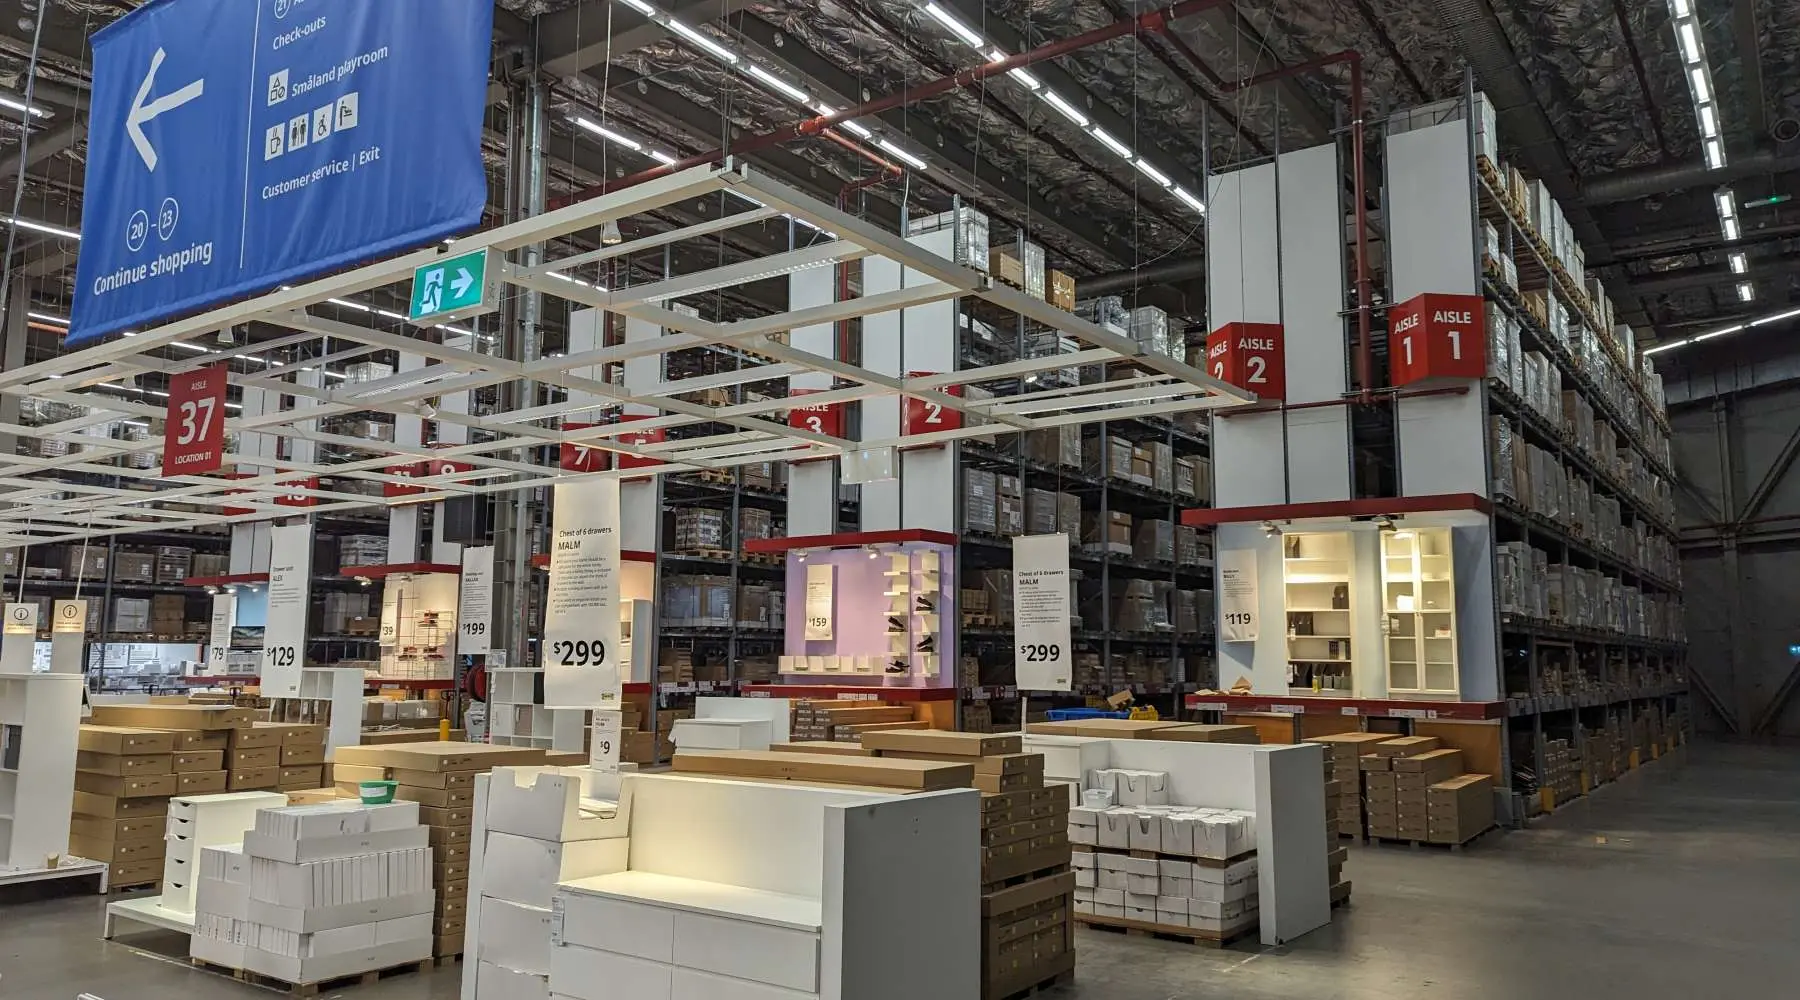 Warehouse area in an IKEA store